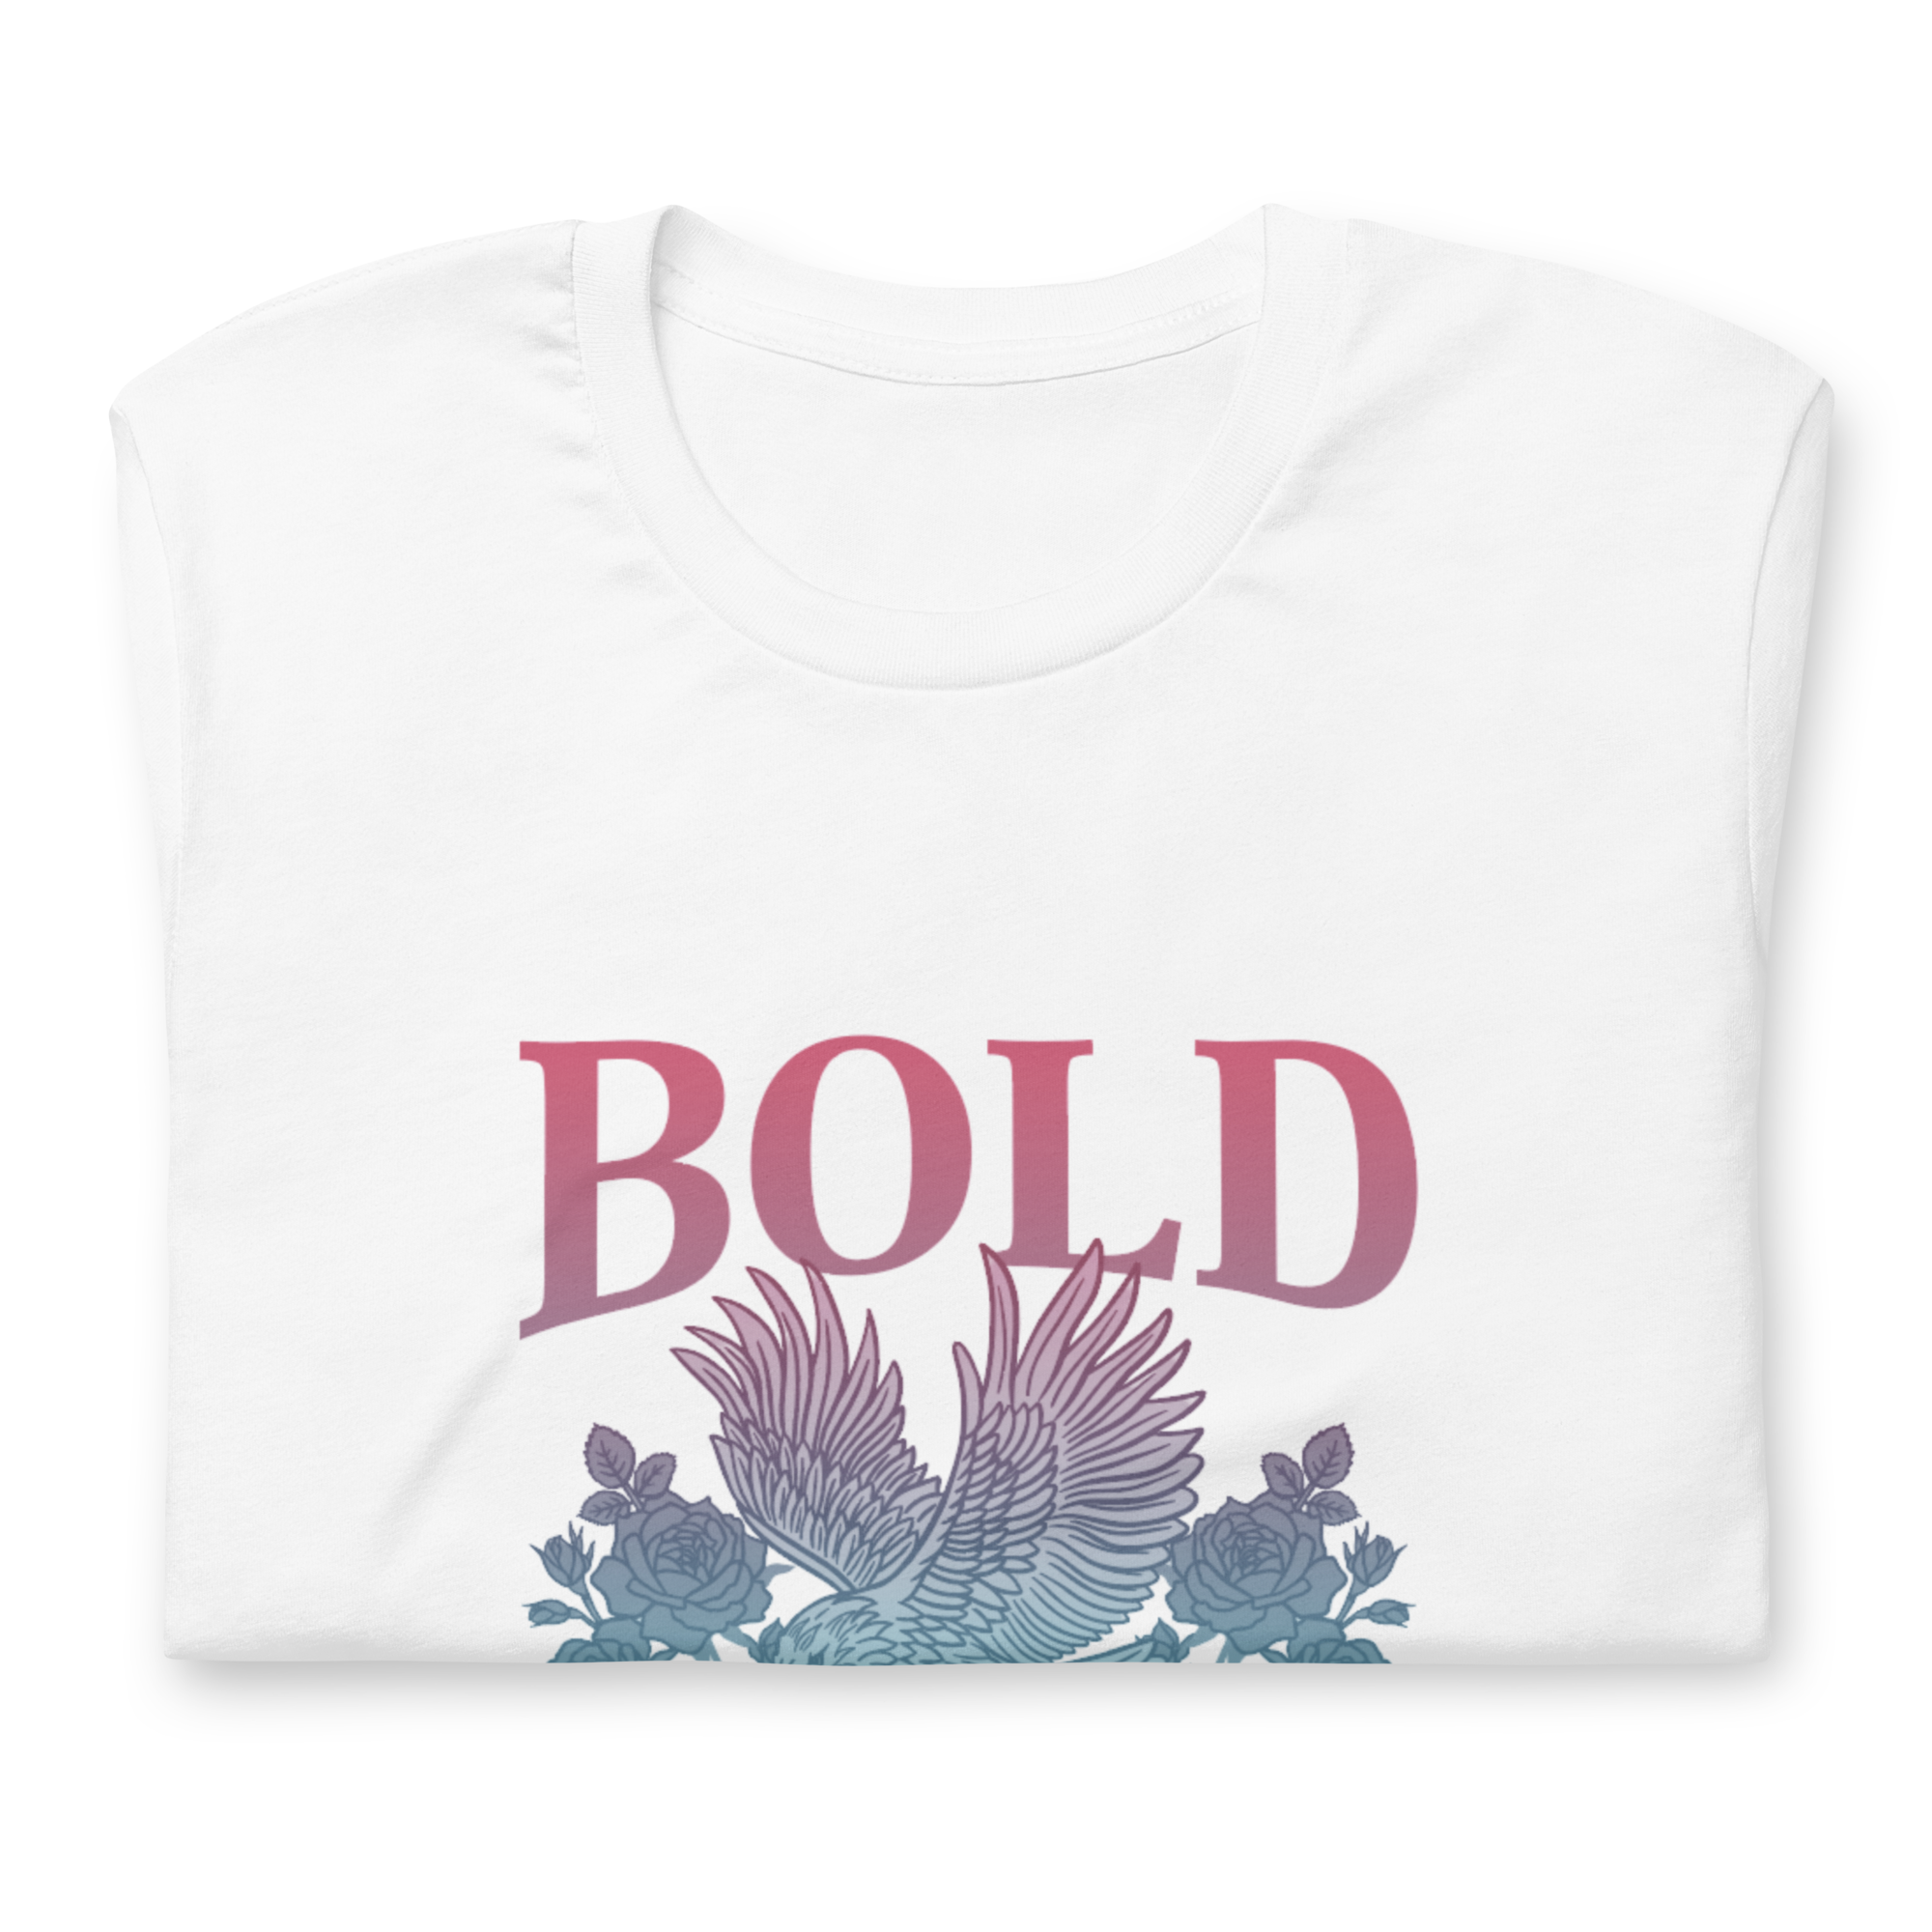 Bold And Unapologetic Loose Fit Tee - Yoga Bitch